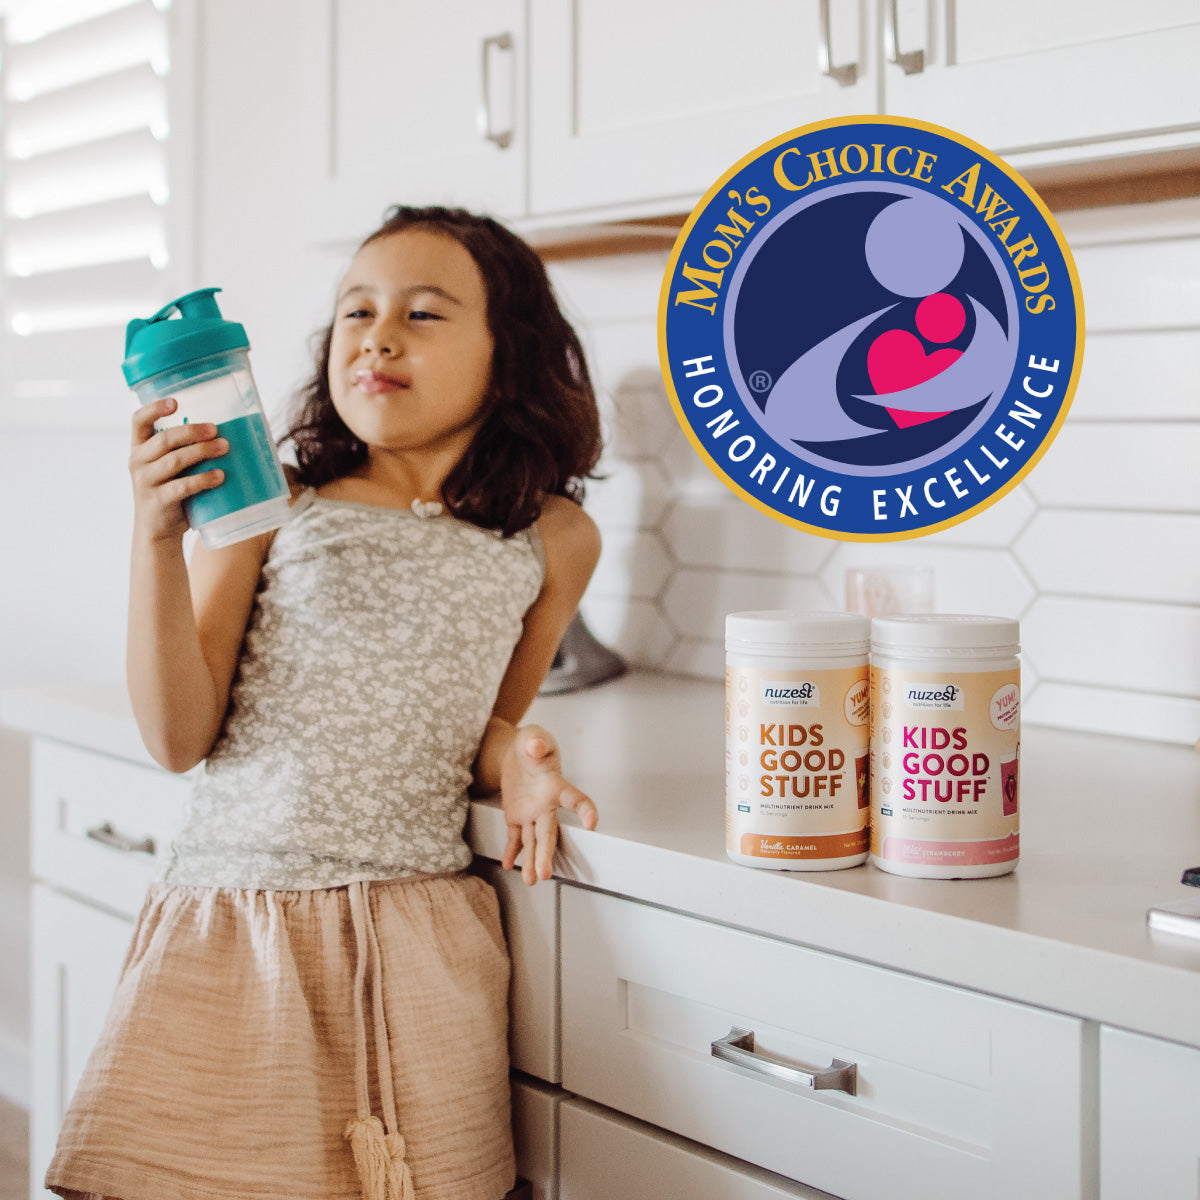 The Mom’s Choice Awards Names Kids Good Stuff Among the Best in Family-Friendly Products